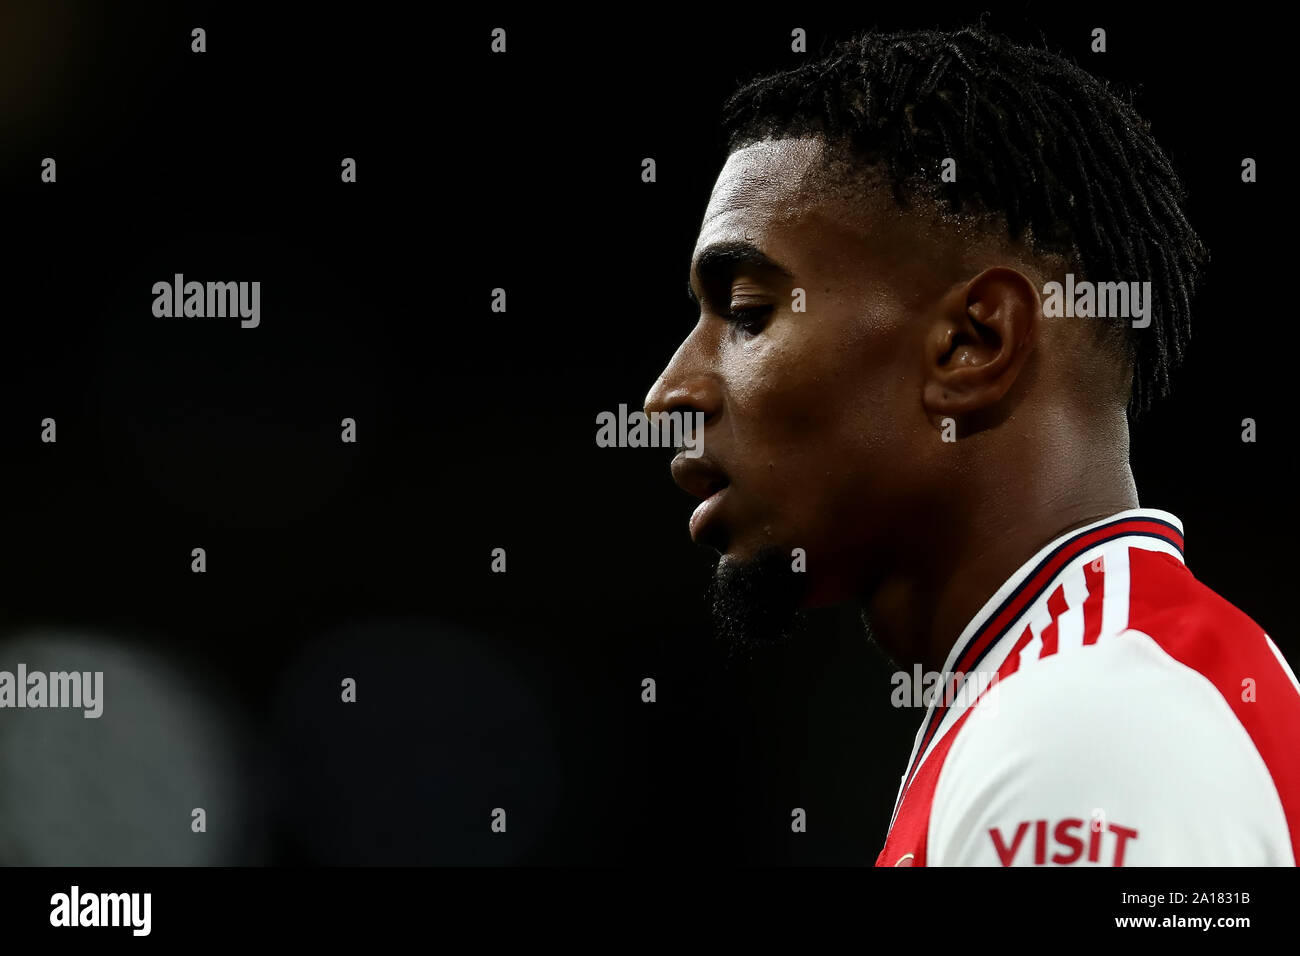 24th September 2019; Emirates Stadium, London, England; English Football League Cup, Carabao Cup, Arsenal Football Club versus Nottingham Forest Football Club; Reiss Nelson of Arsenal - Strictly Editorial Use Only. No use with unauthorized audio, video, data, fixture lists, club/league logos or 'live' services. Online in-match use limited to 120 images, no video emulation. No use in betting, games or single club/league/player publications Stock Photo